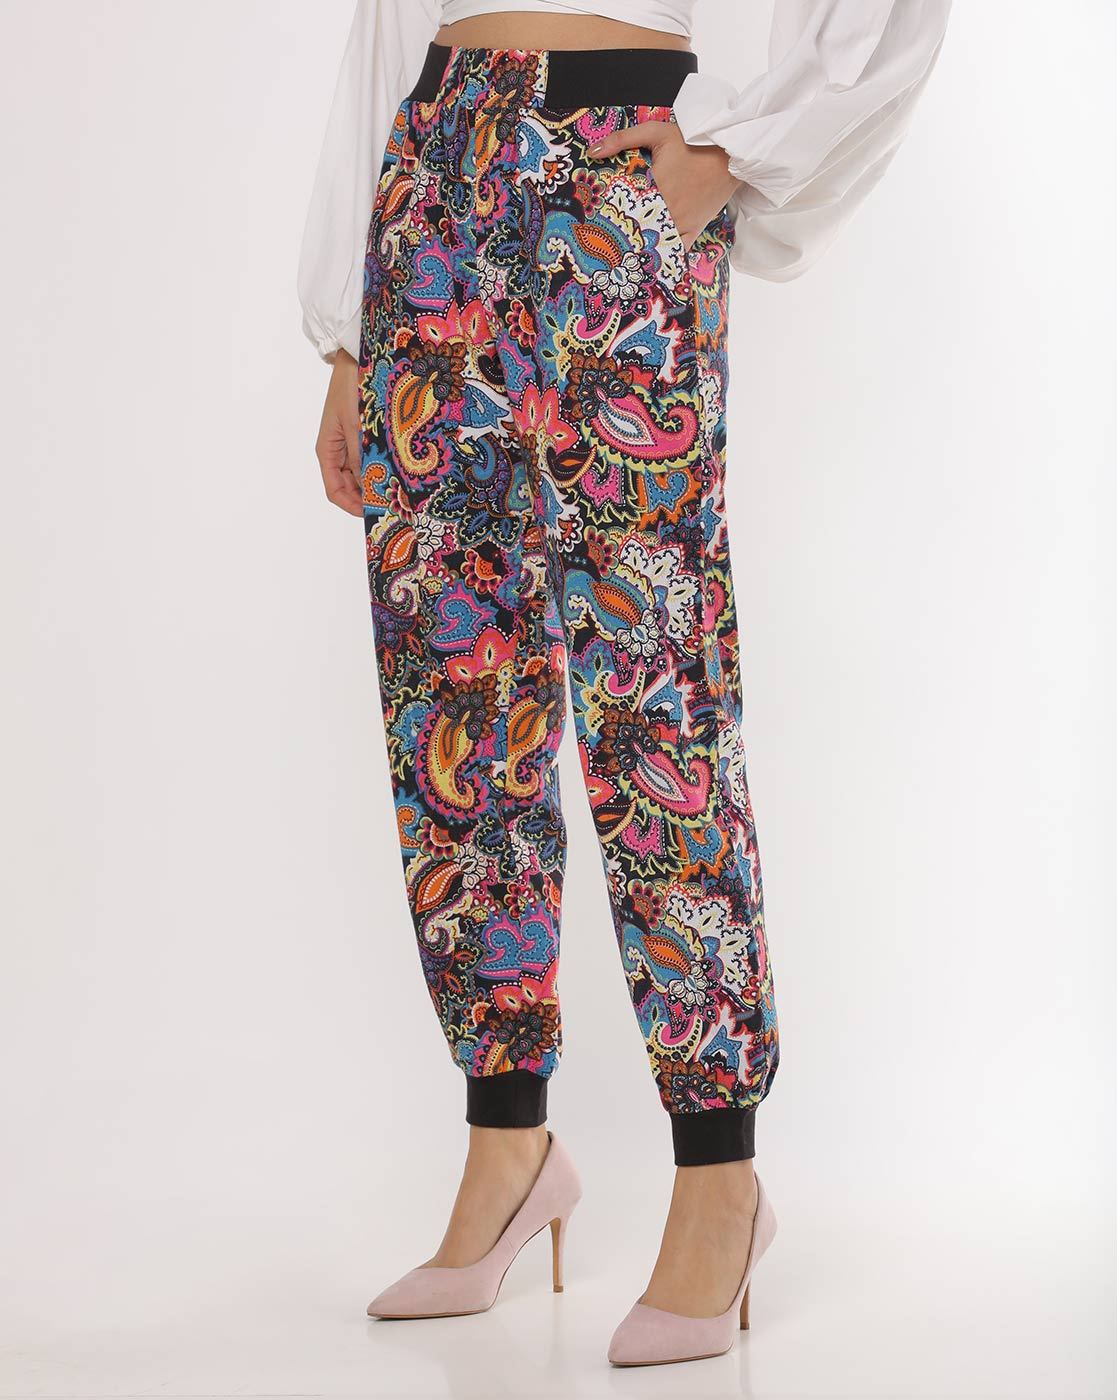 Printed Pants Fall Fashion Trend  For Your Wardrobe  Brit  Co